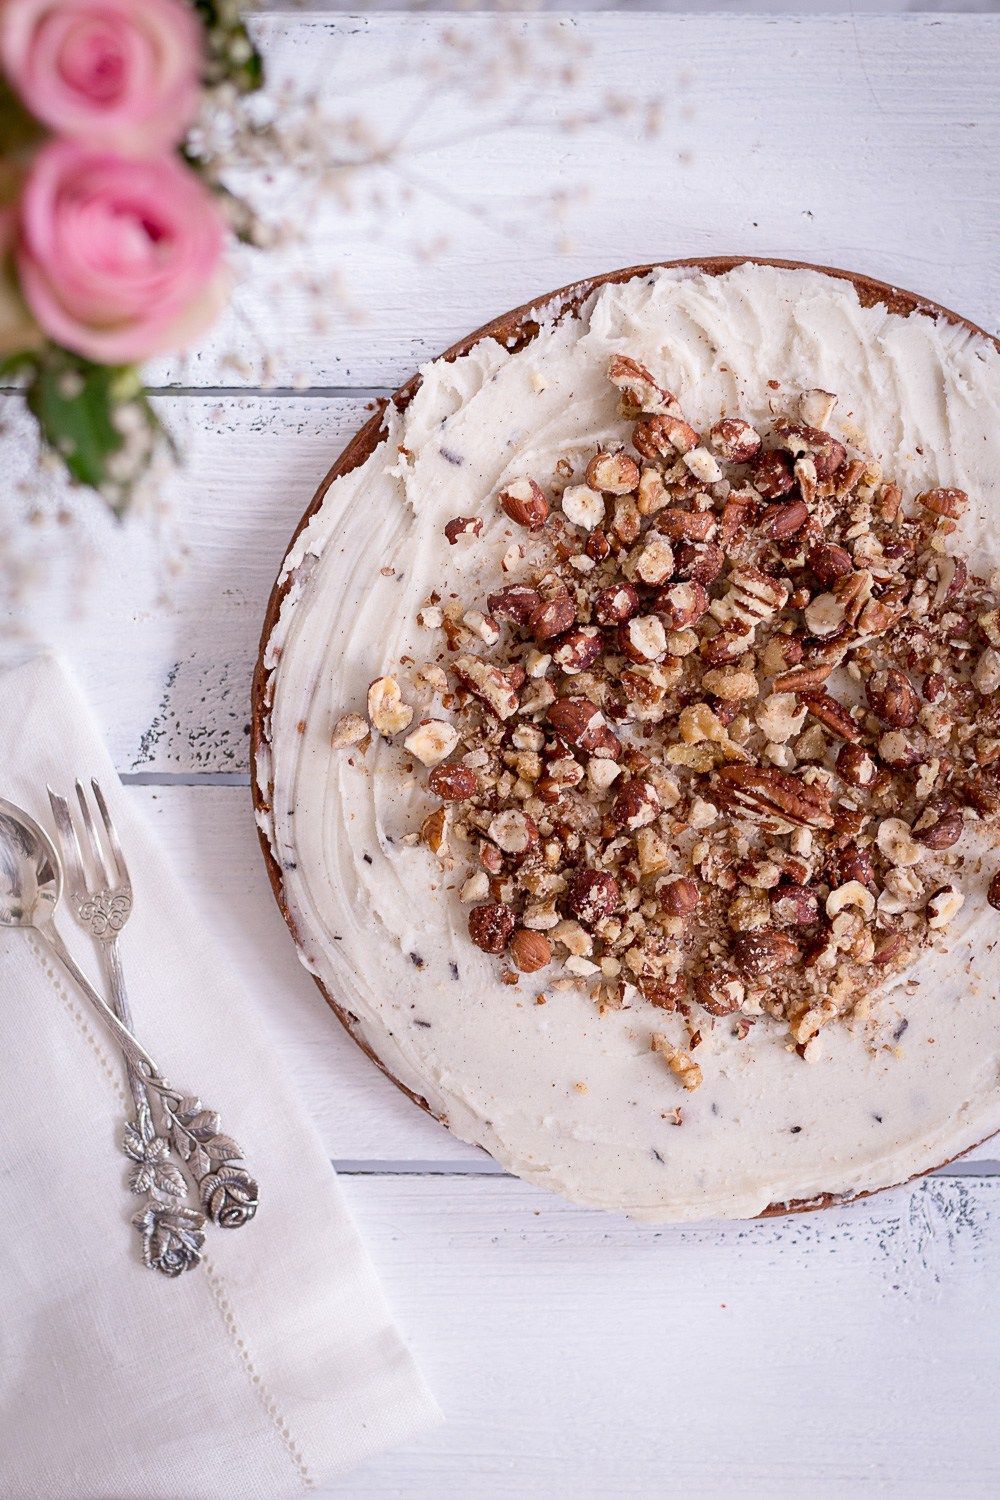 The best healthy carrot cake -   16 carrot cake Photography ideas